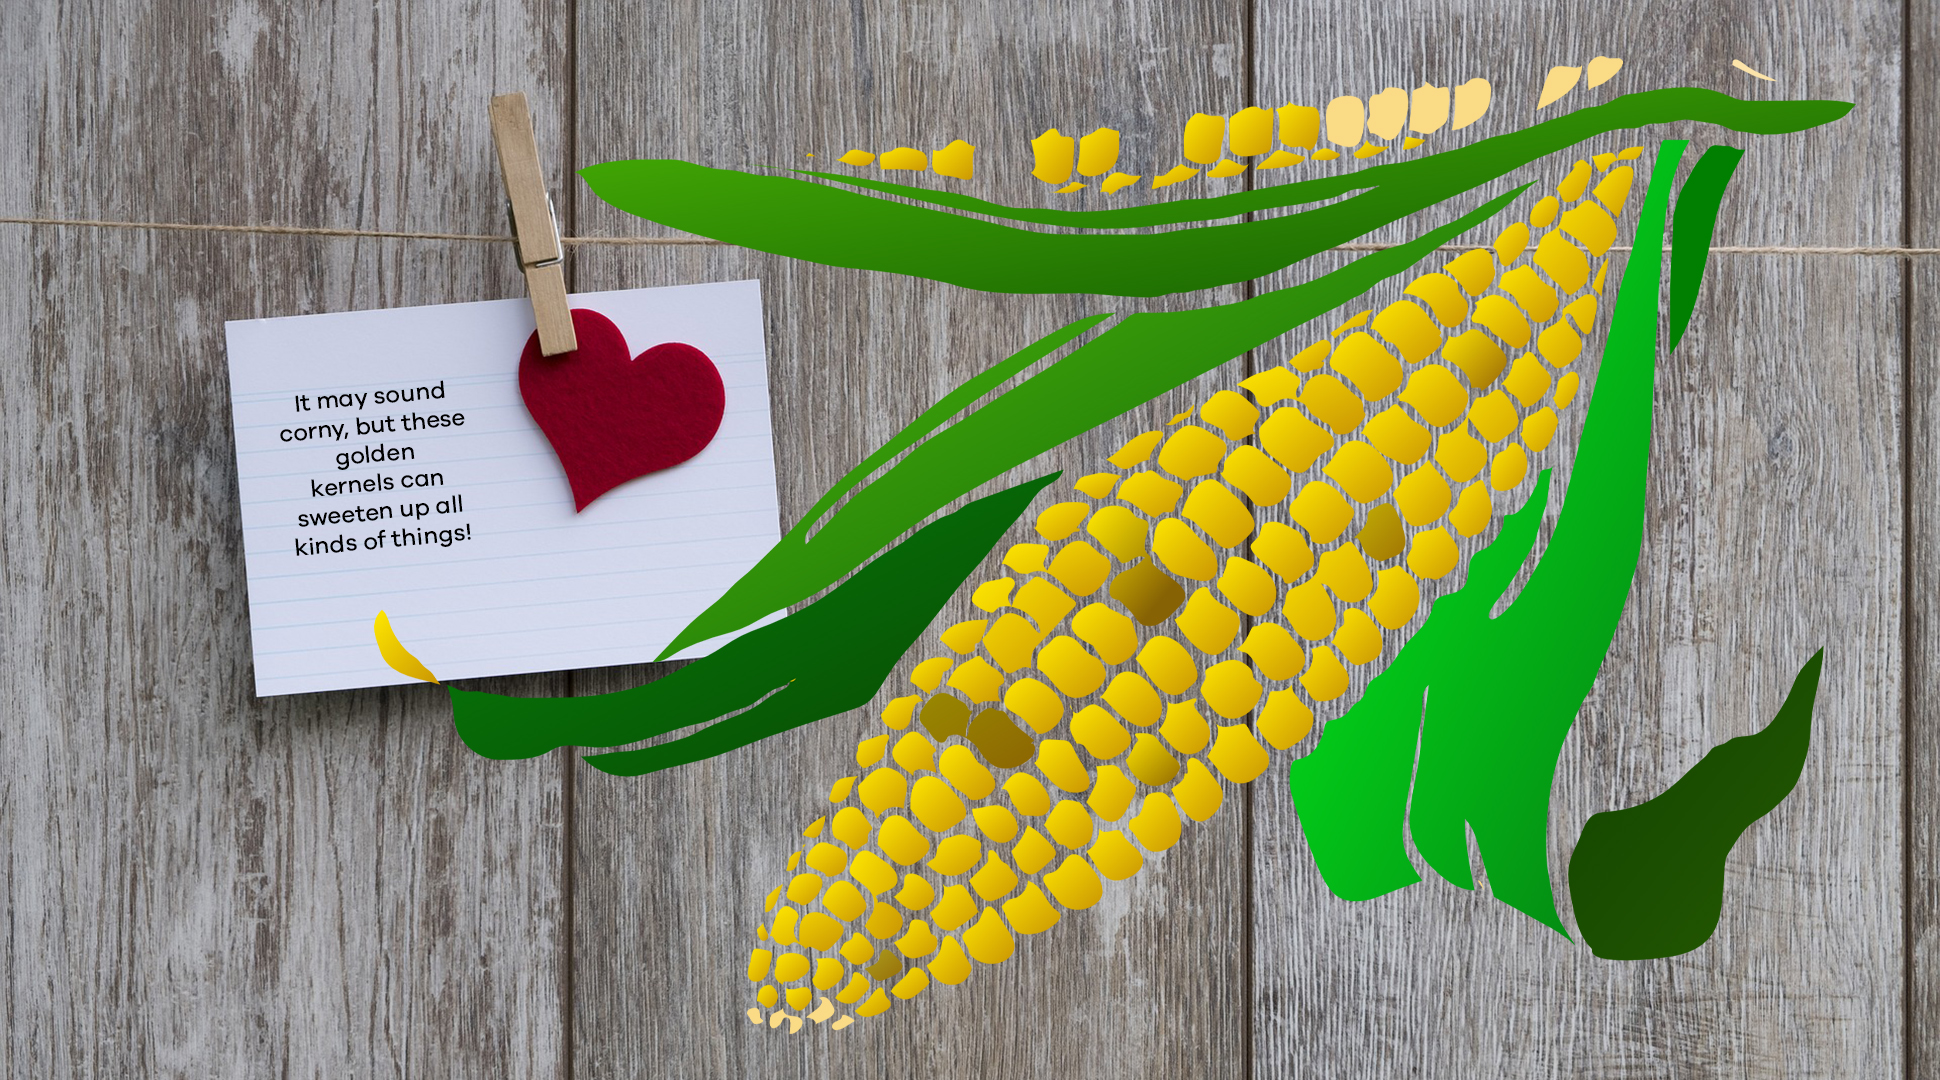 Getting corny for Valentine's Day